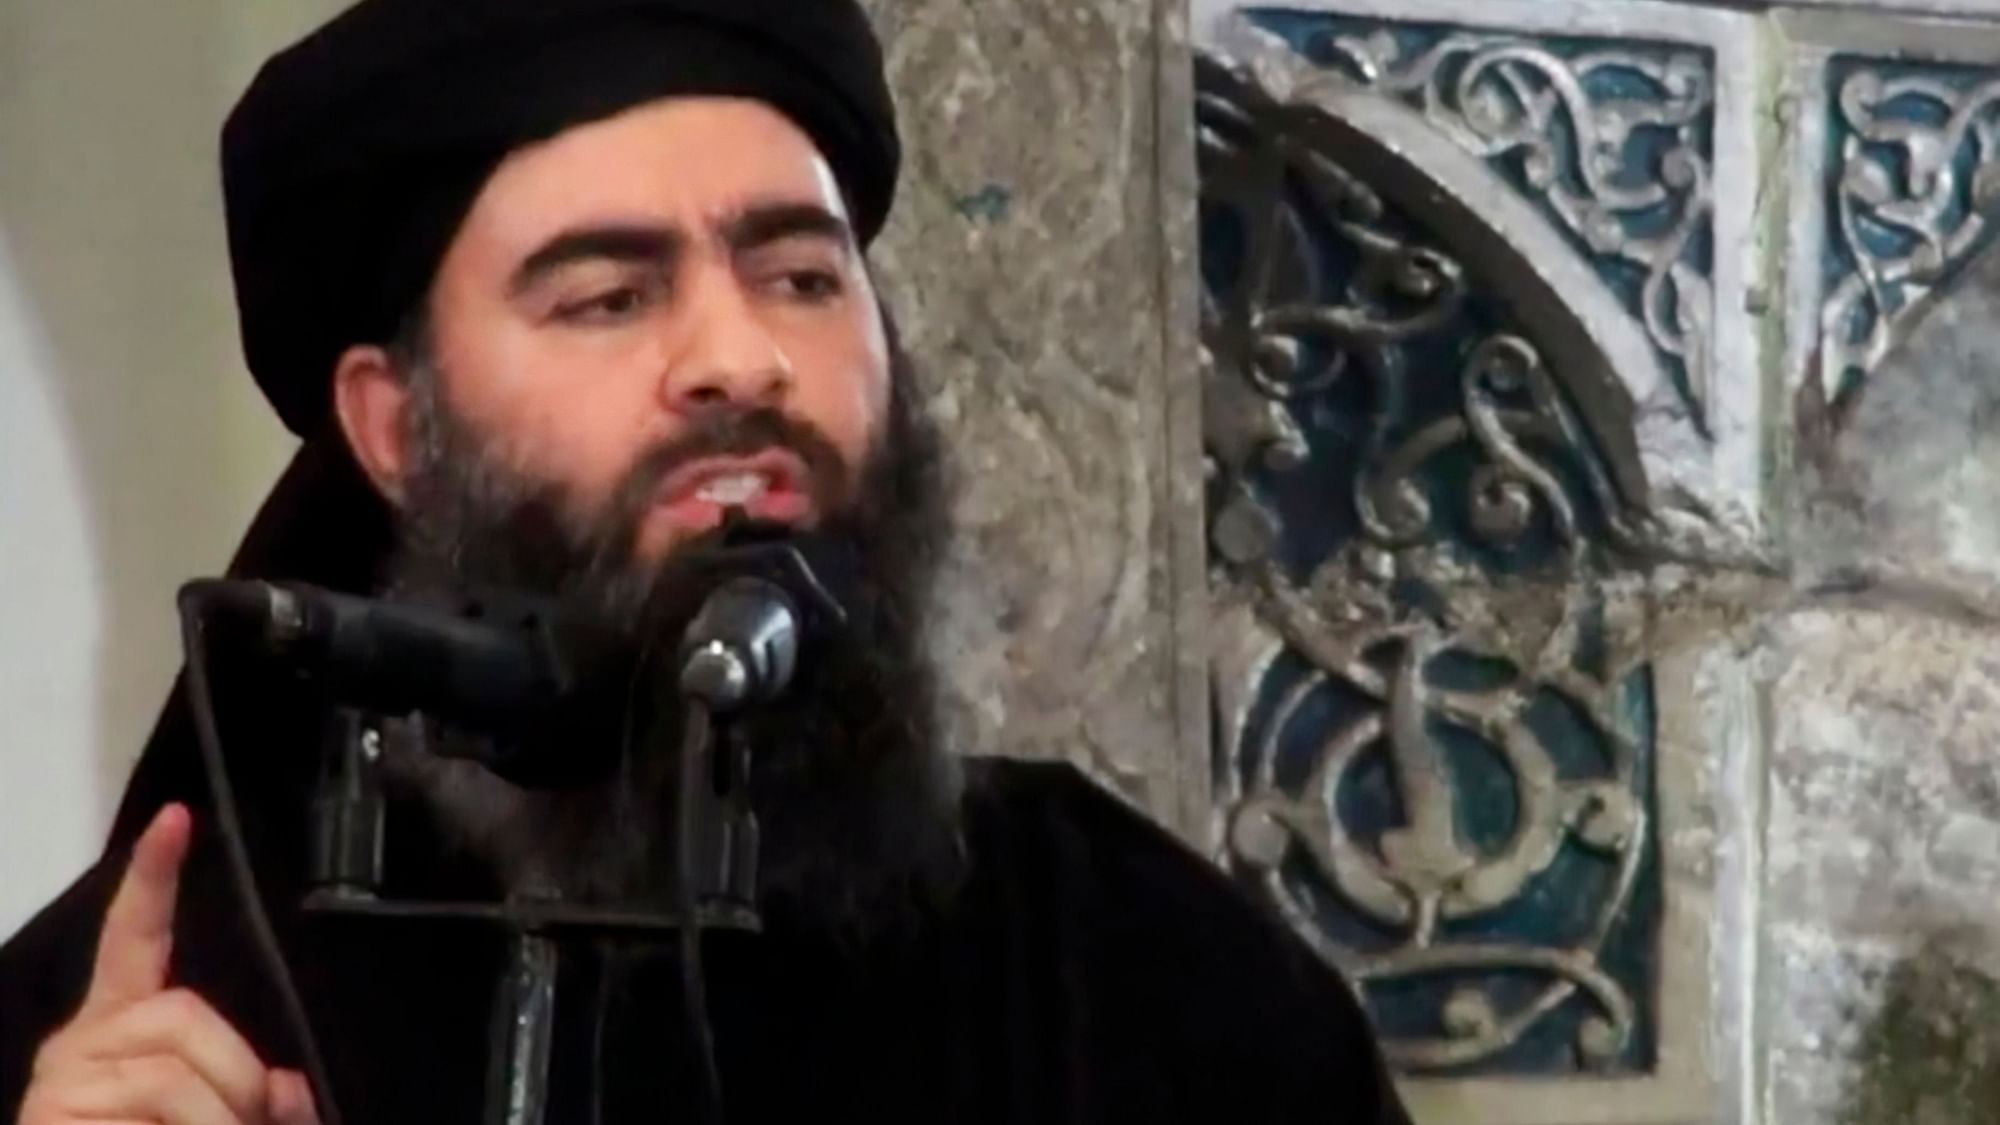 This picture is from a video posted on a militant website on 5 July, 2014 showing Abu Bakr al-Baghdadi, leader of the Islamic state group.